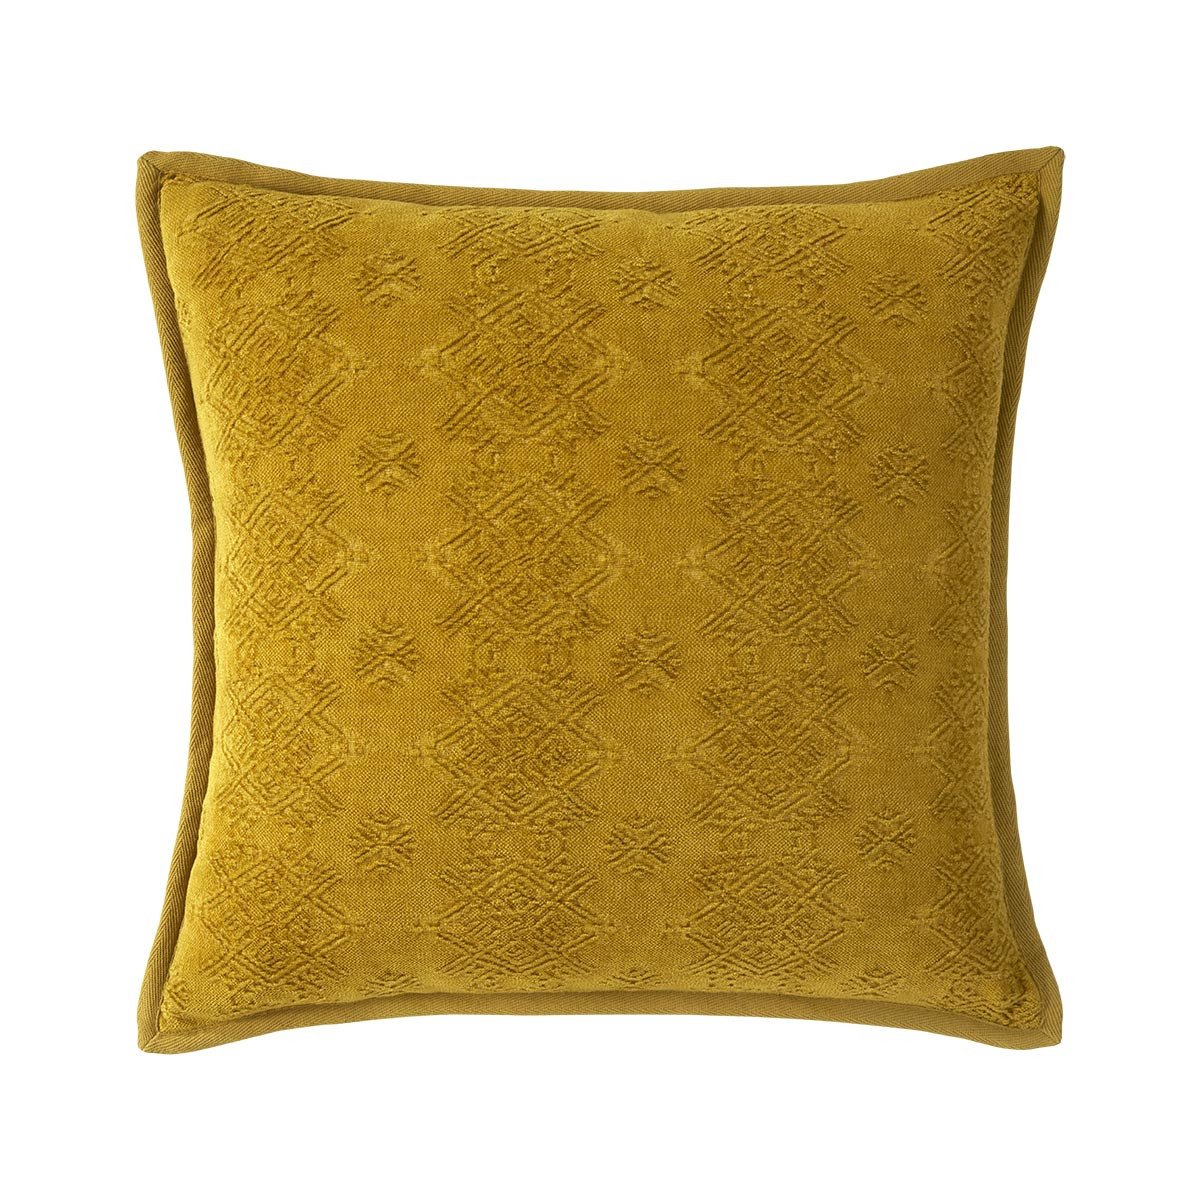 Syracuse Safran Decorative Pillow by Iosis | Fig Linens and Home